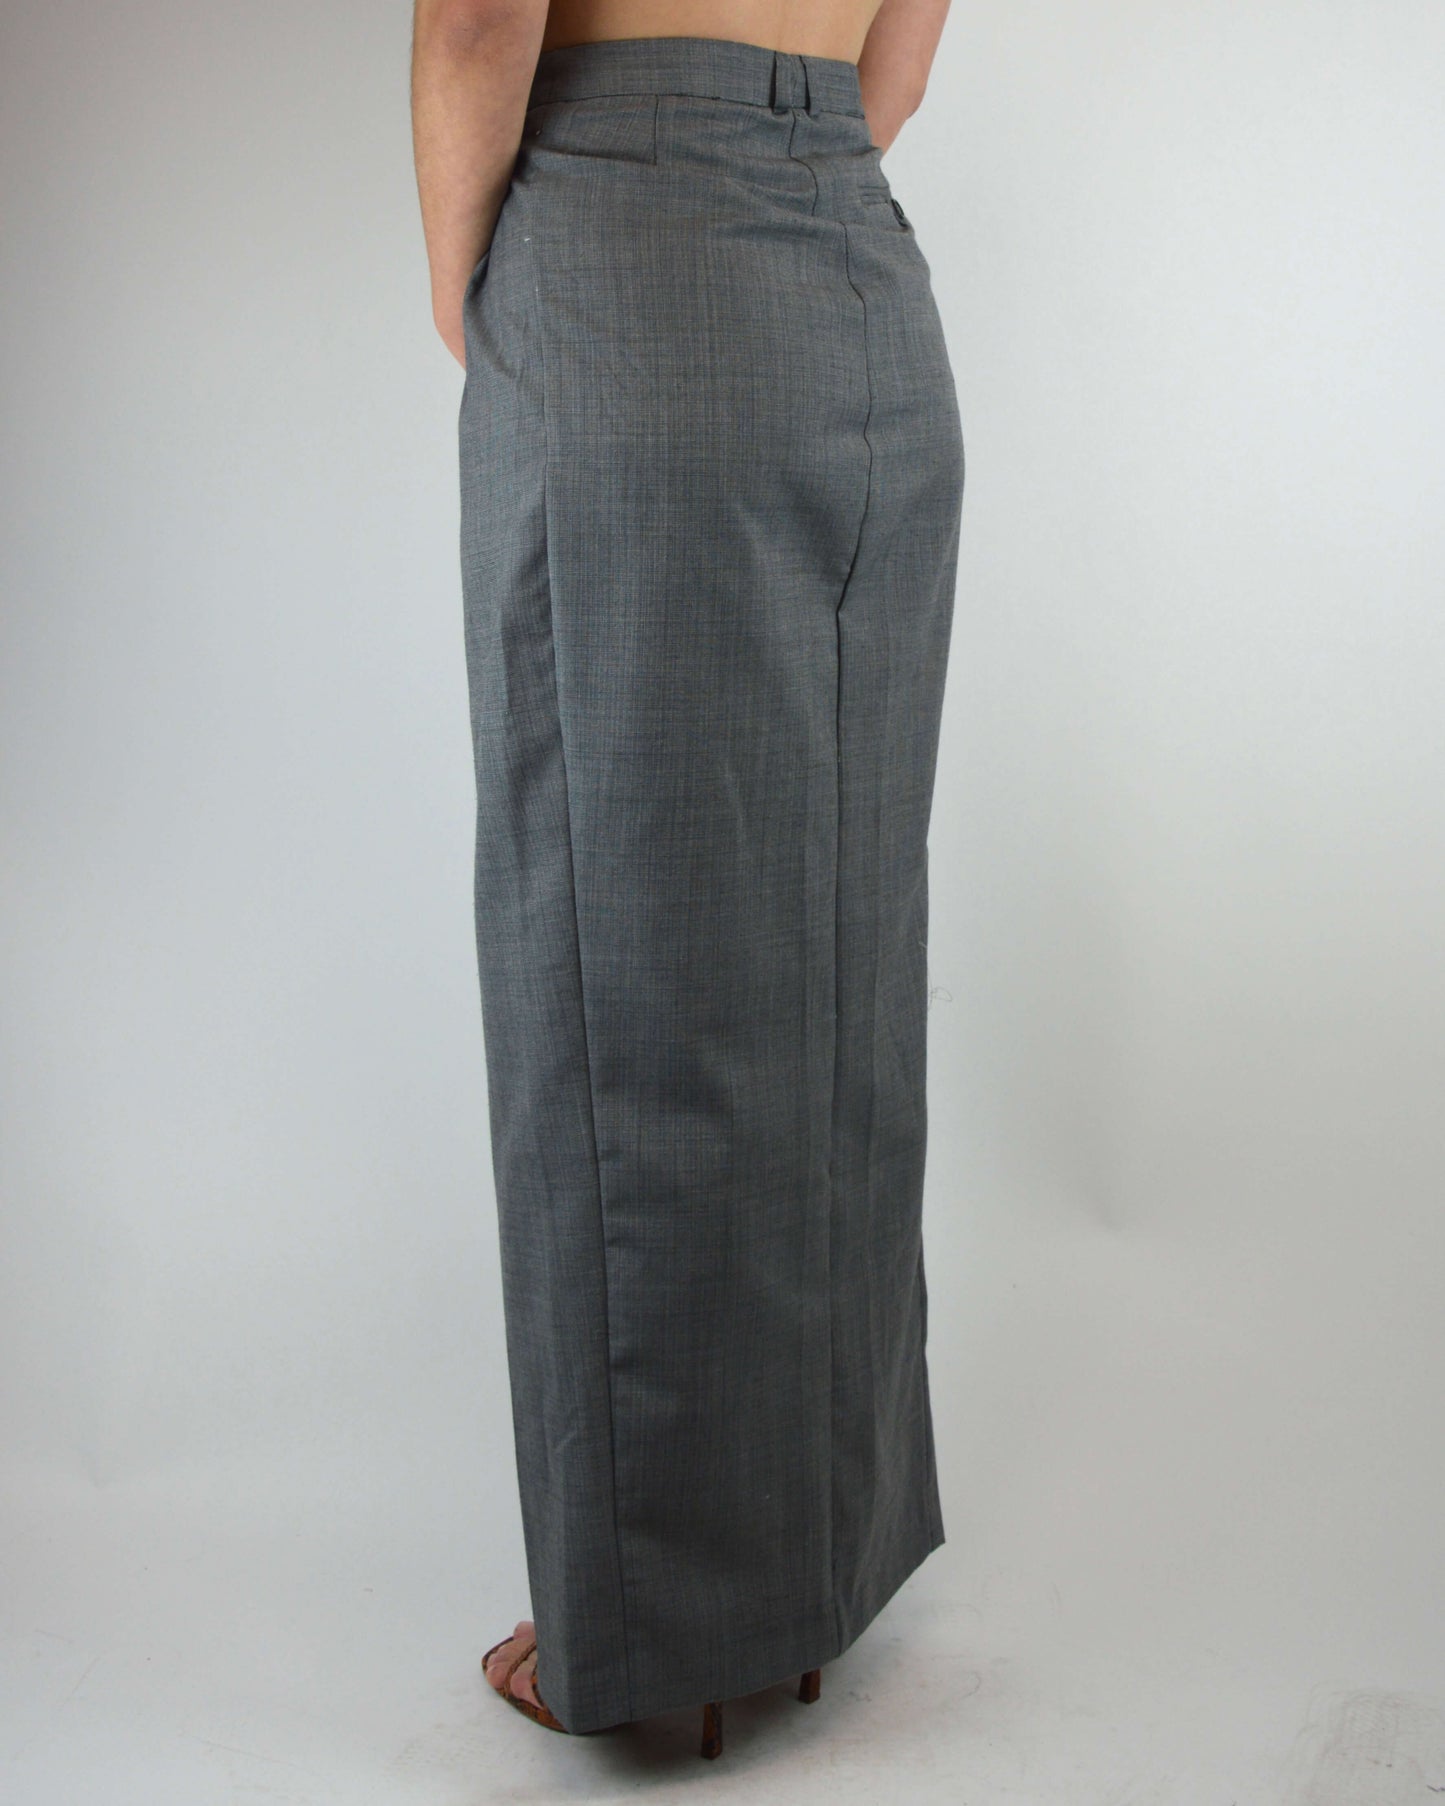 Skirt Suit - Marbeled Grey (S/M)